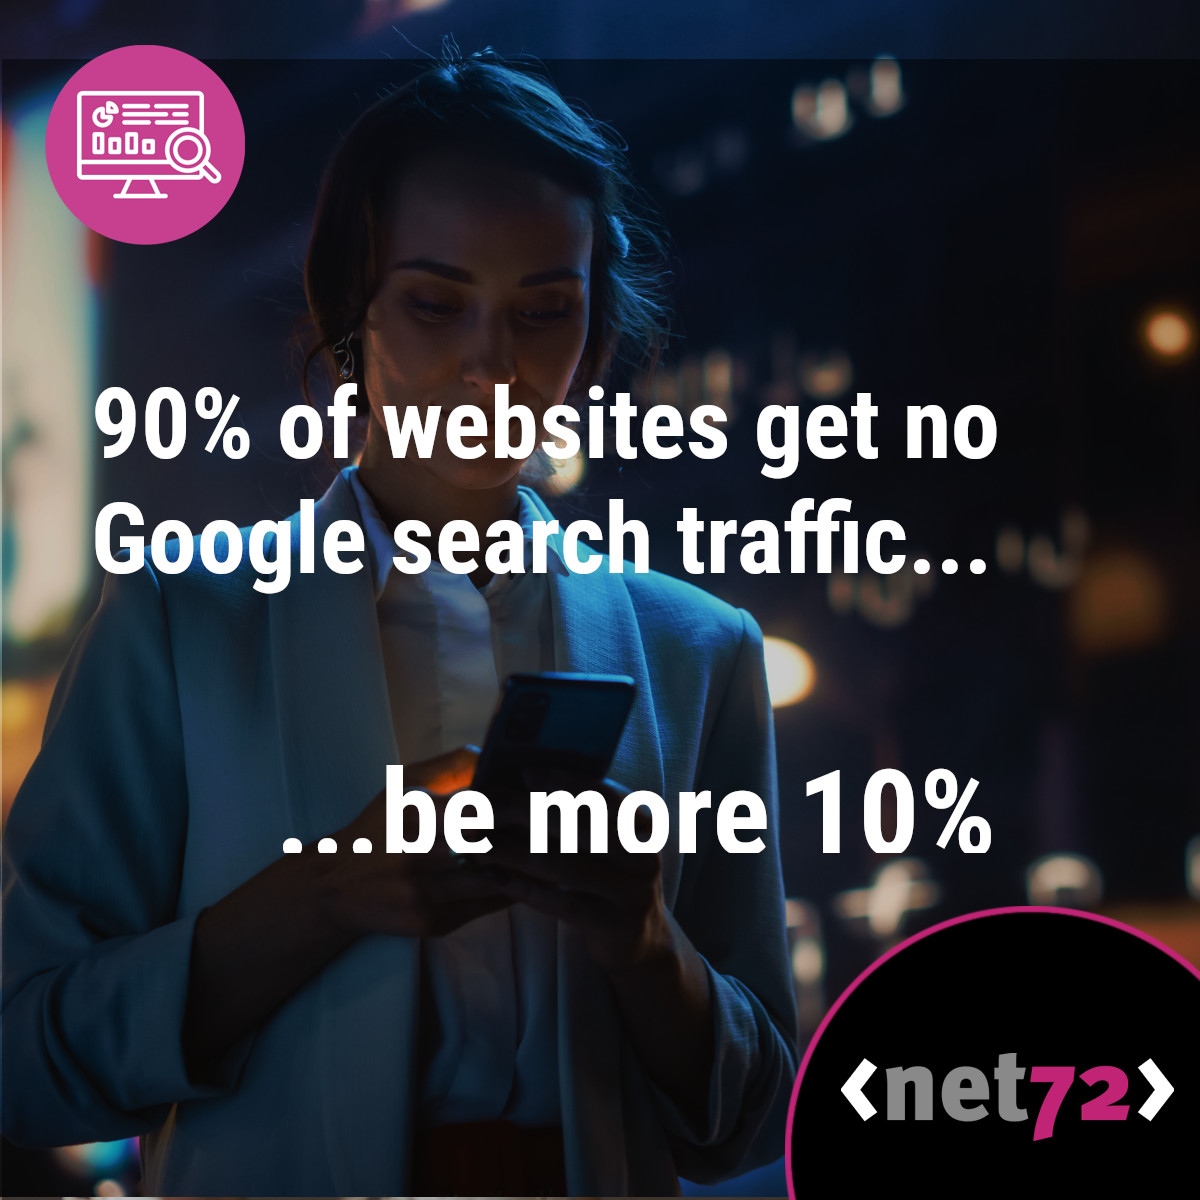 Stay ahead of the game! Ensure your website is getting the #GoogleTraffic it deserves. Follow best SEO practices & use the right keywords to get the visibility you need. #SEO #SEOStrategy #DigitalMarketing